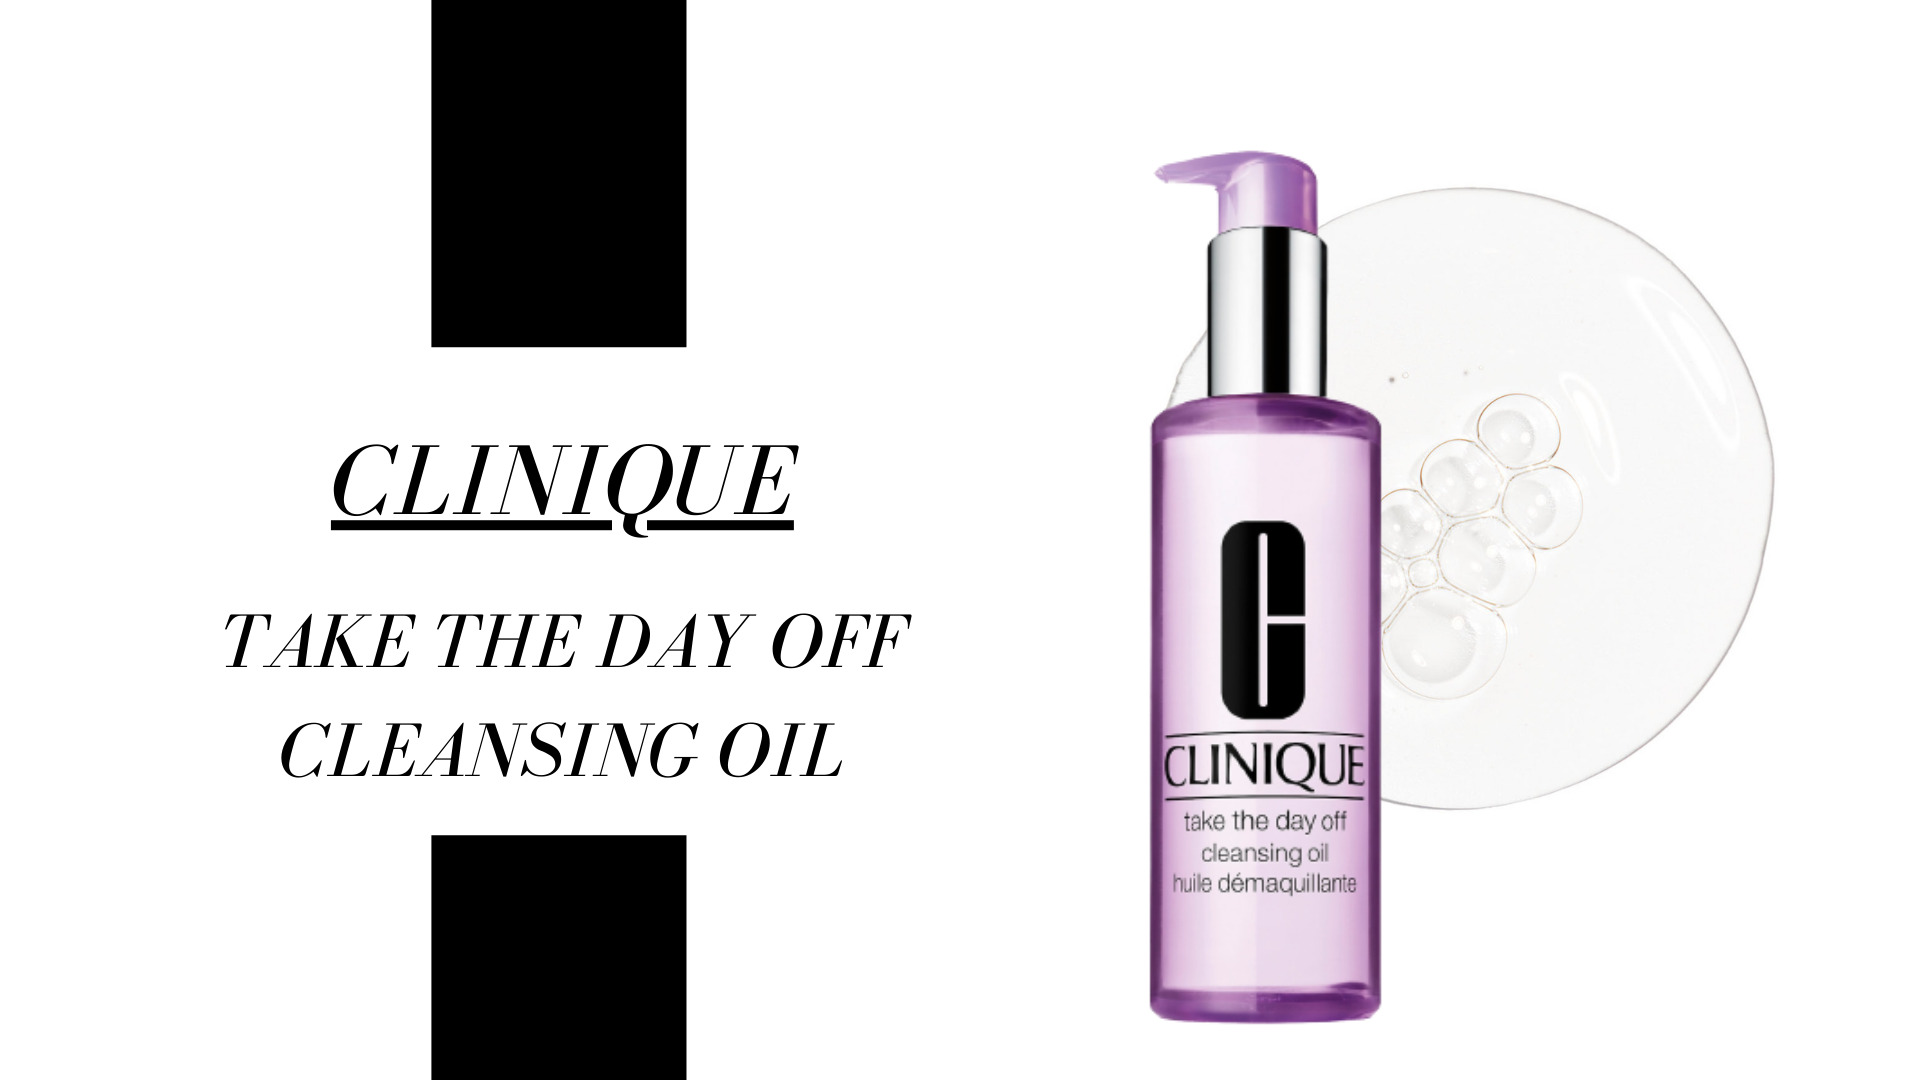 This Clinique cleanser is a classic. It is recommended for all skin types and easily glides on rinsing off cleanly with water, without leaving residue behind. This powerful oil dissolves all traces of makeup and impurities. Plus it was made without parabens and has been ophthalmologist tested.